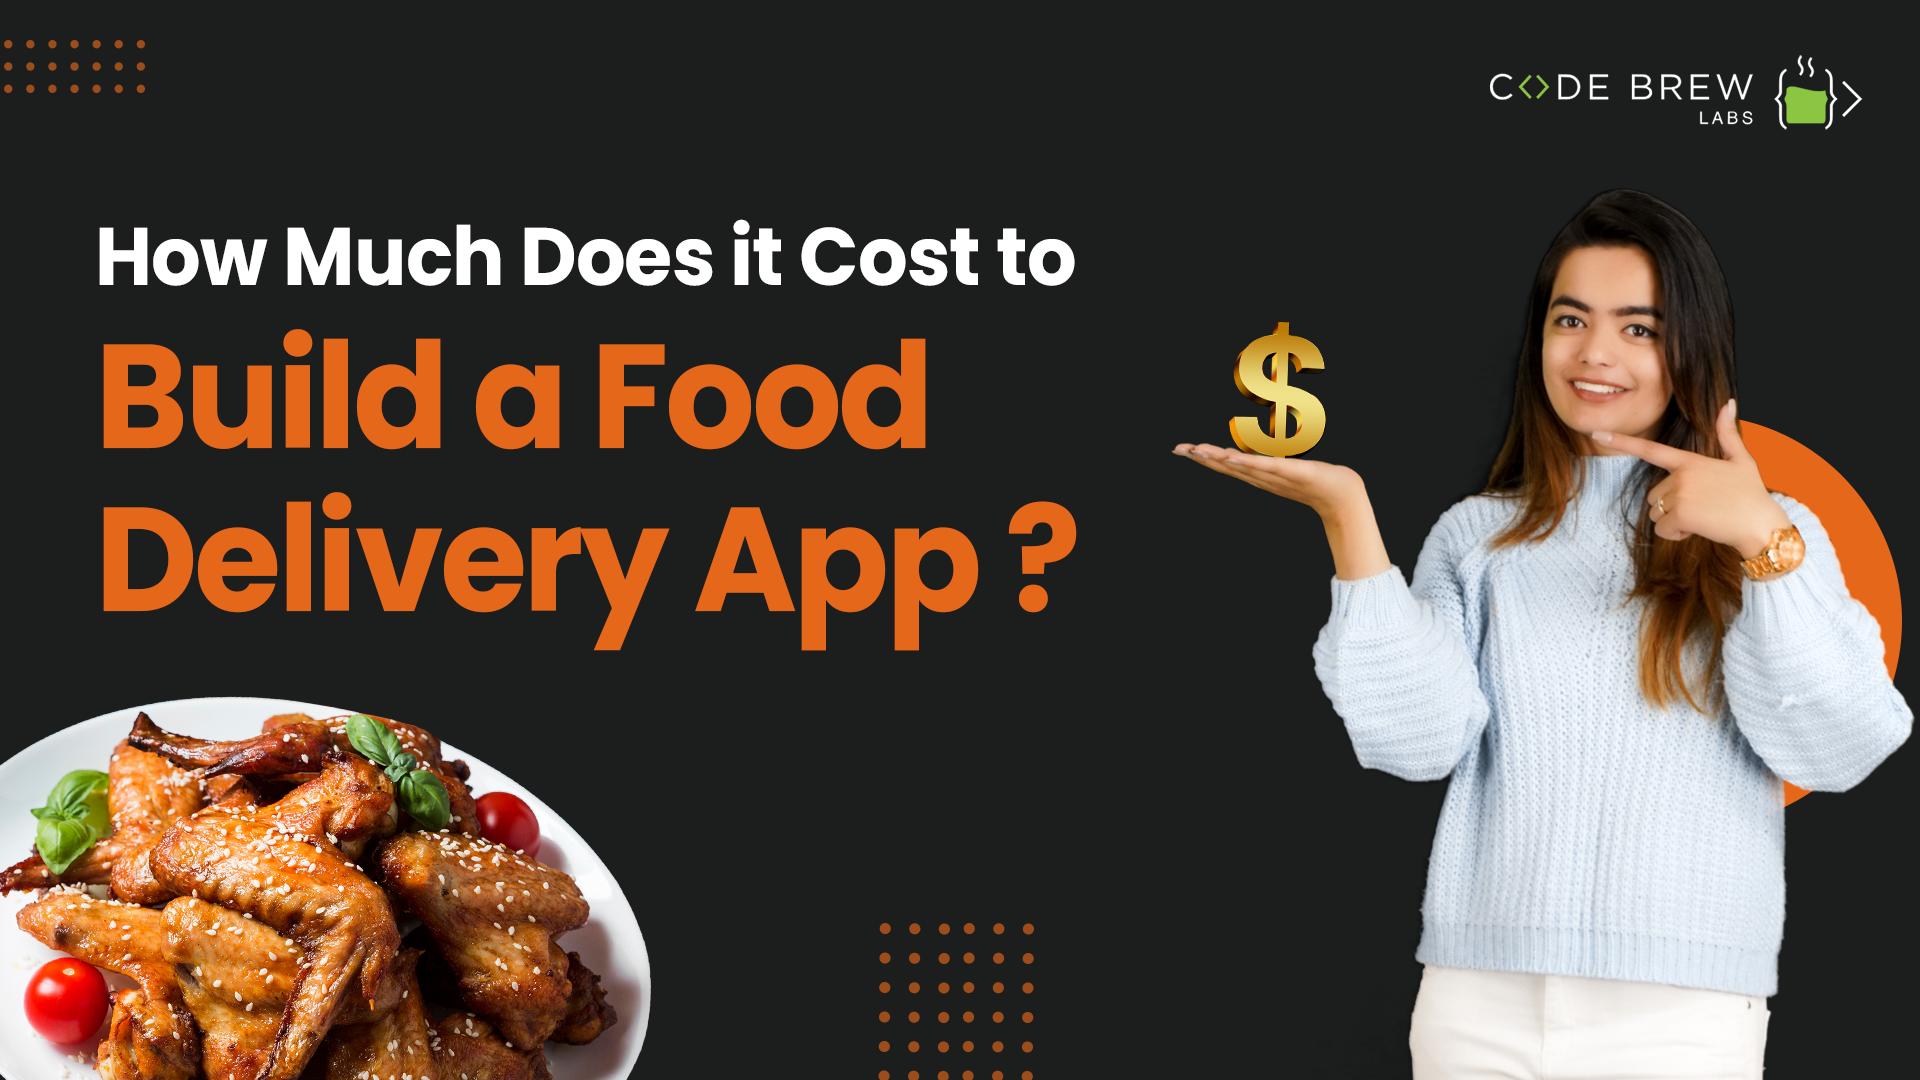 Cost to Develop Food App